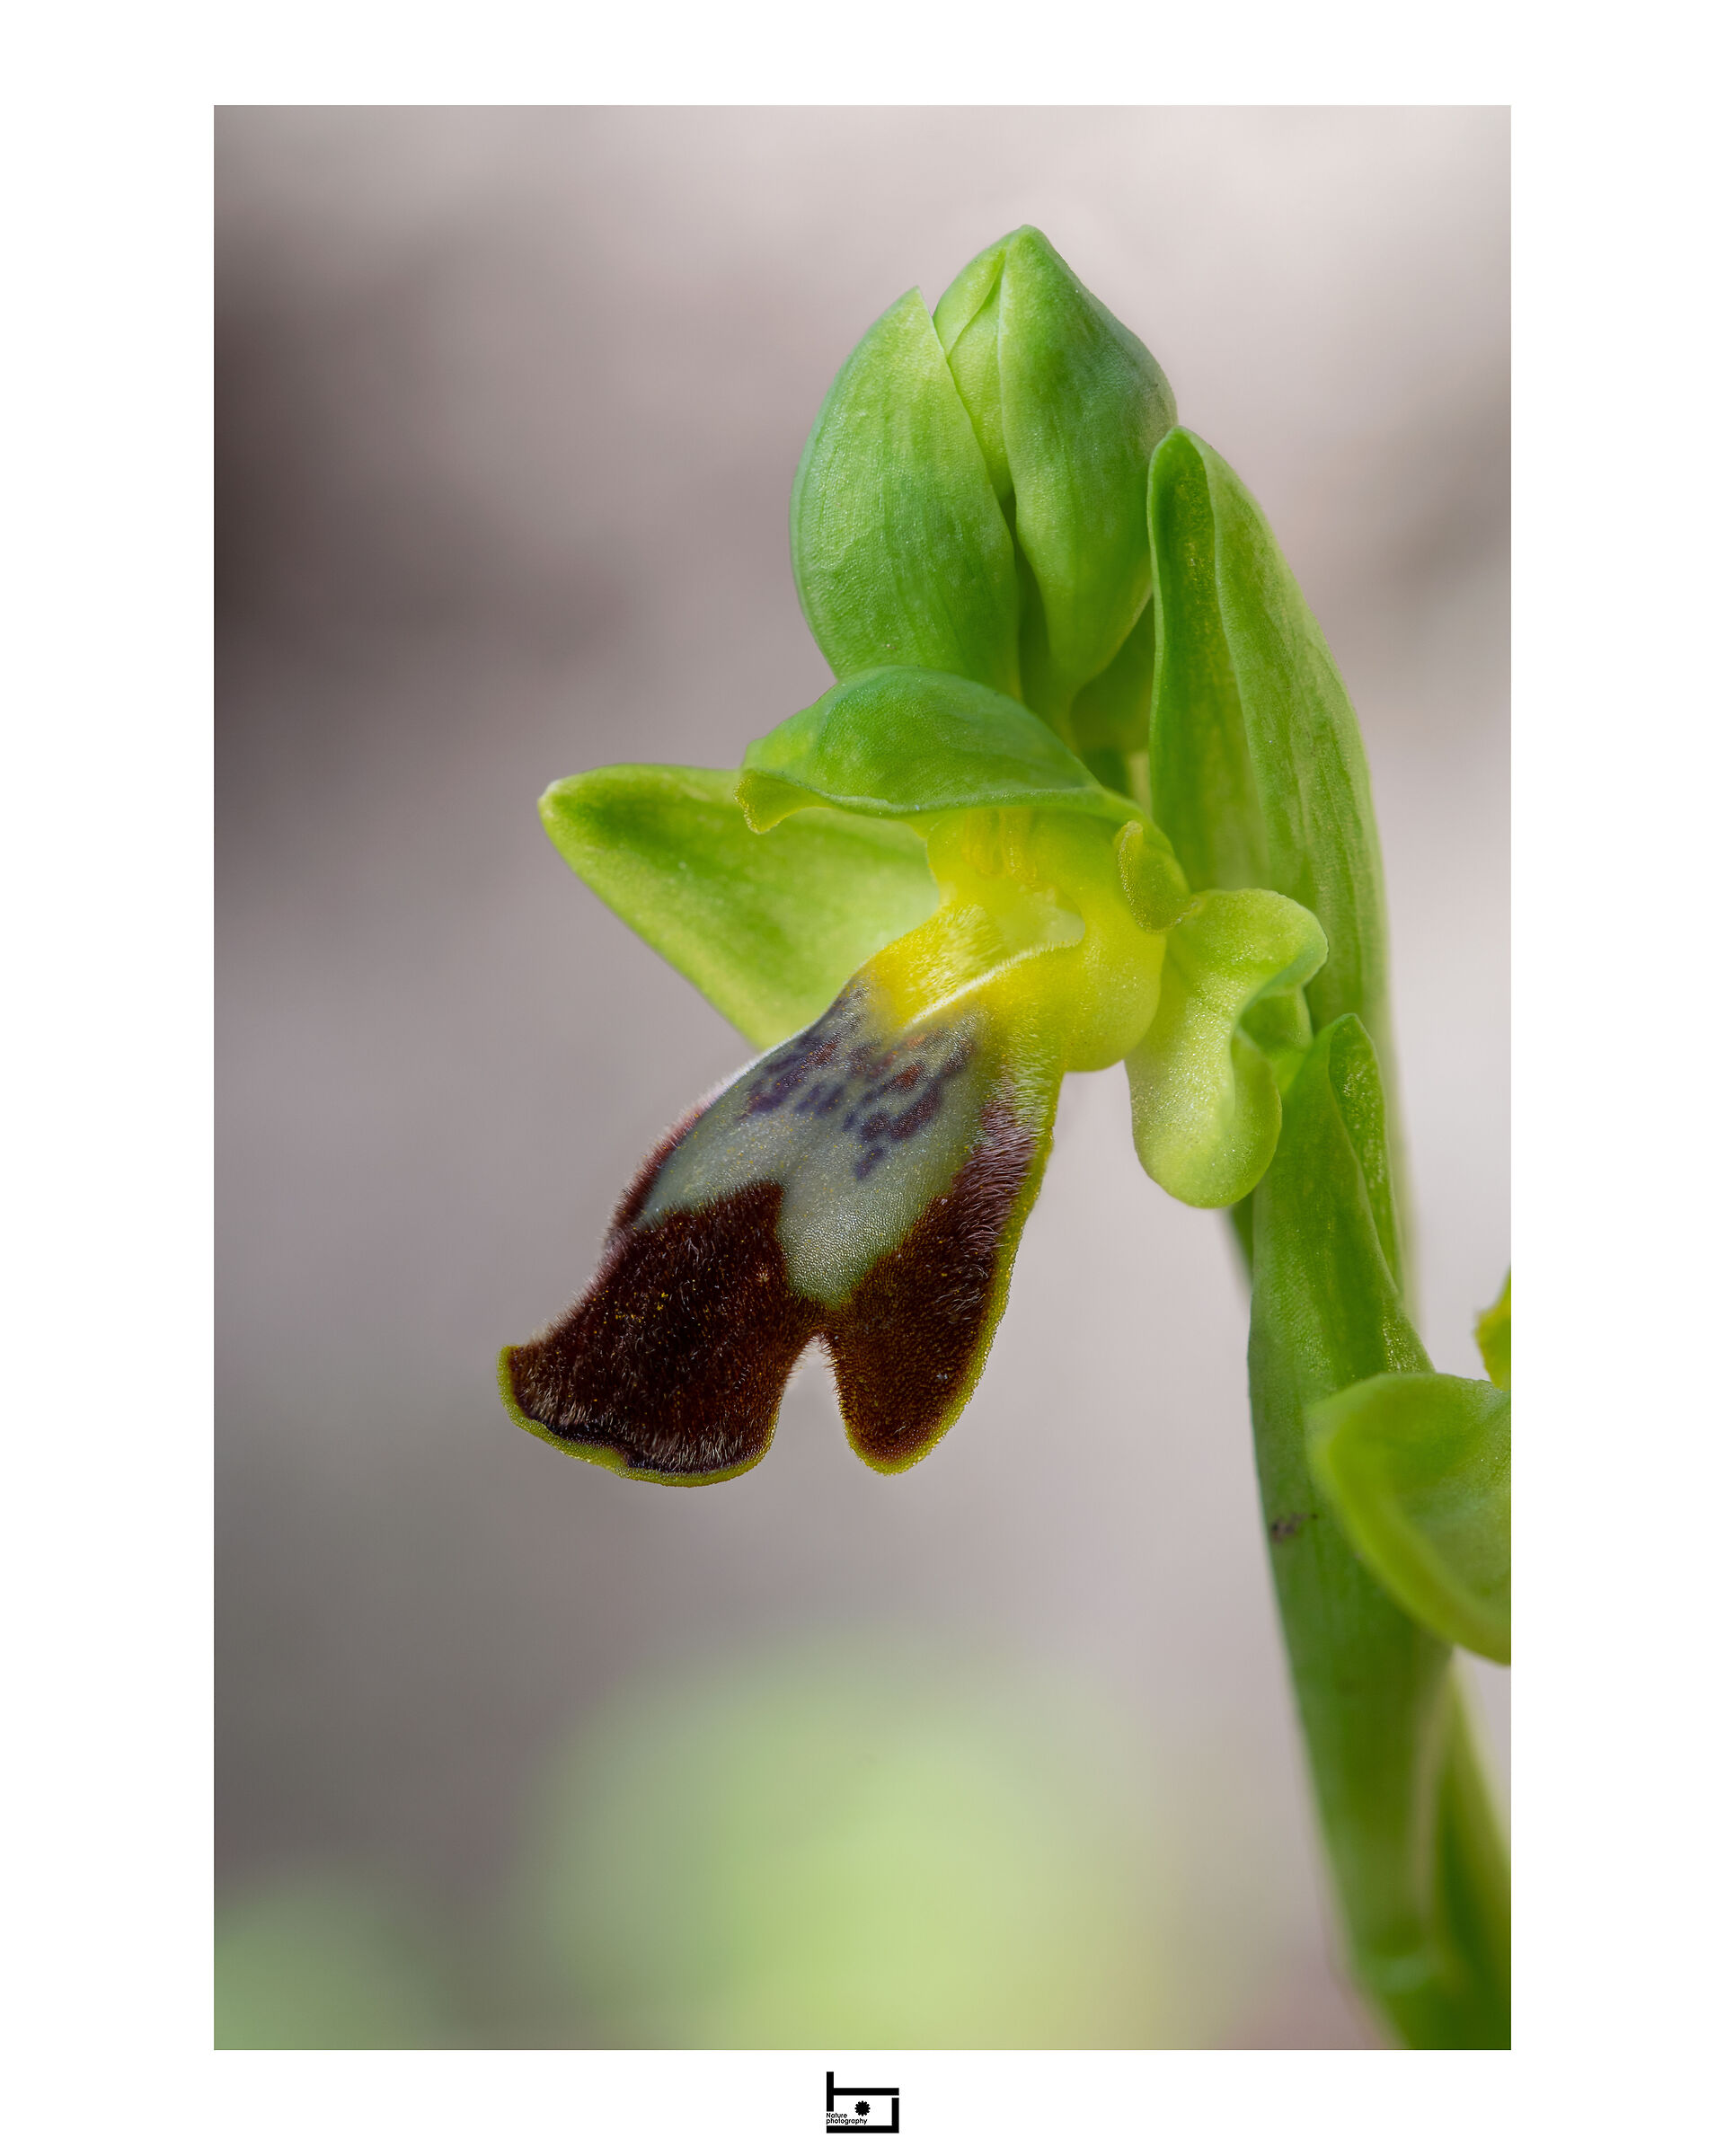 Archetype3/model=?:Ophrys-lupercalis:...